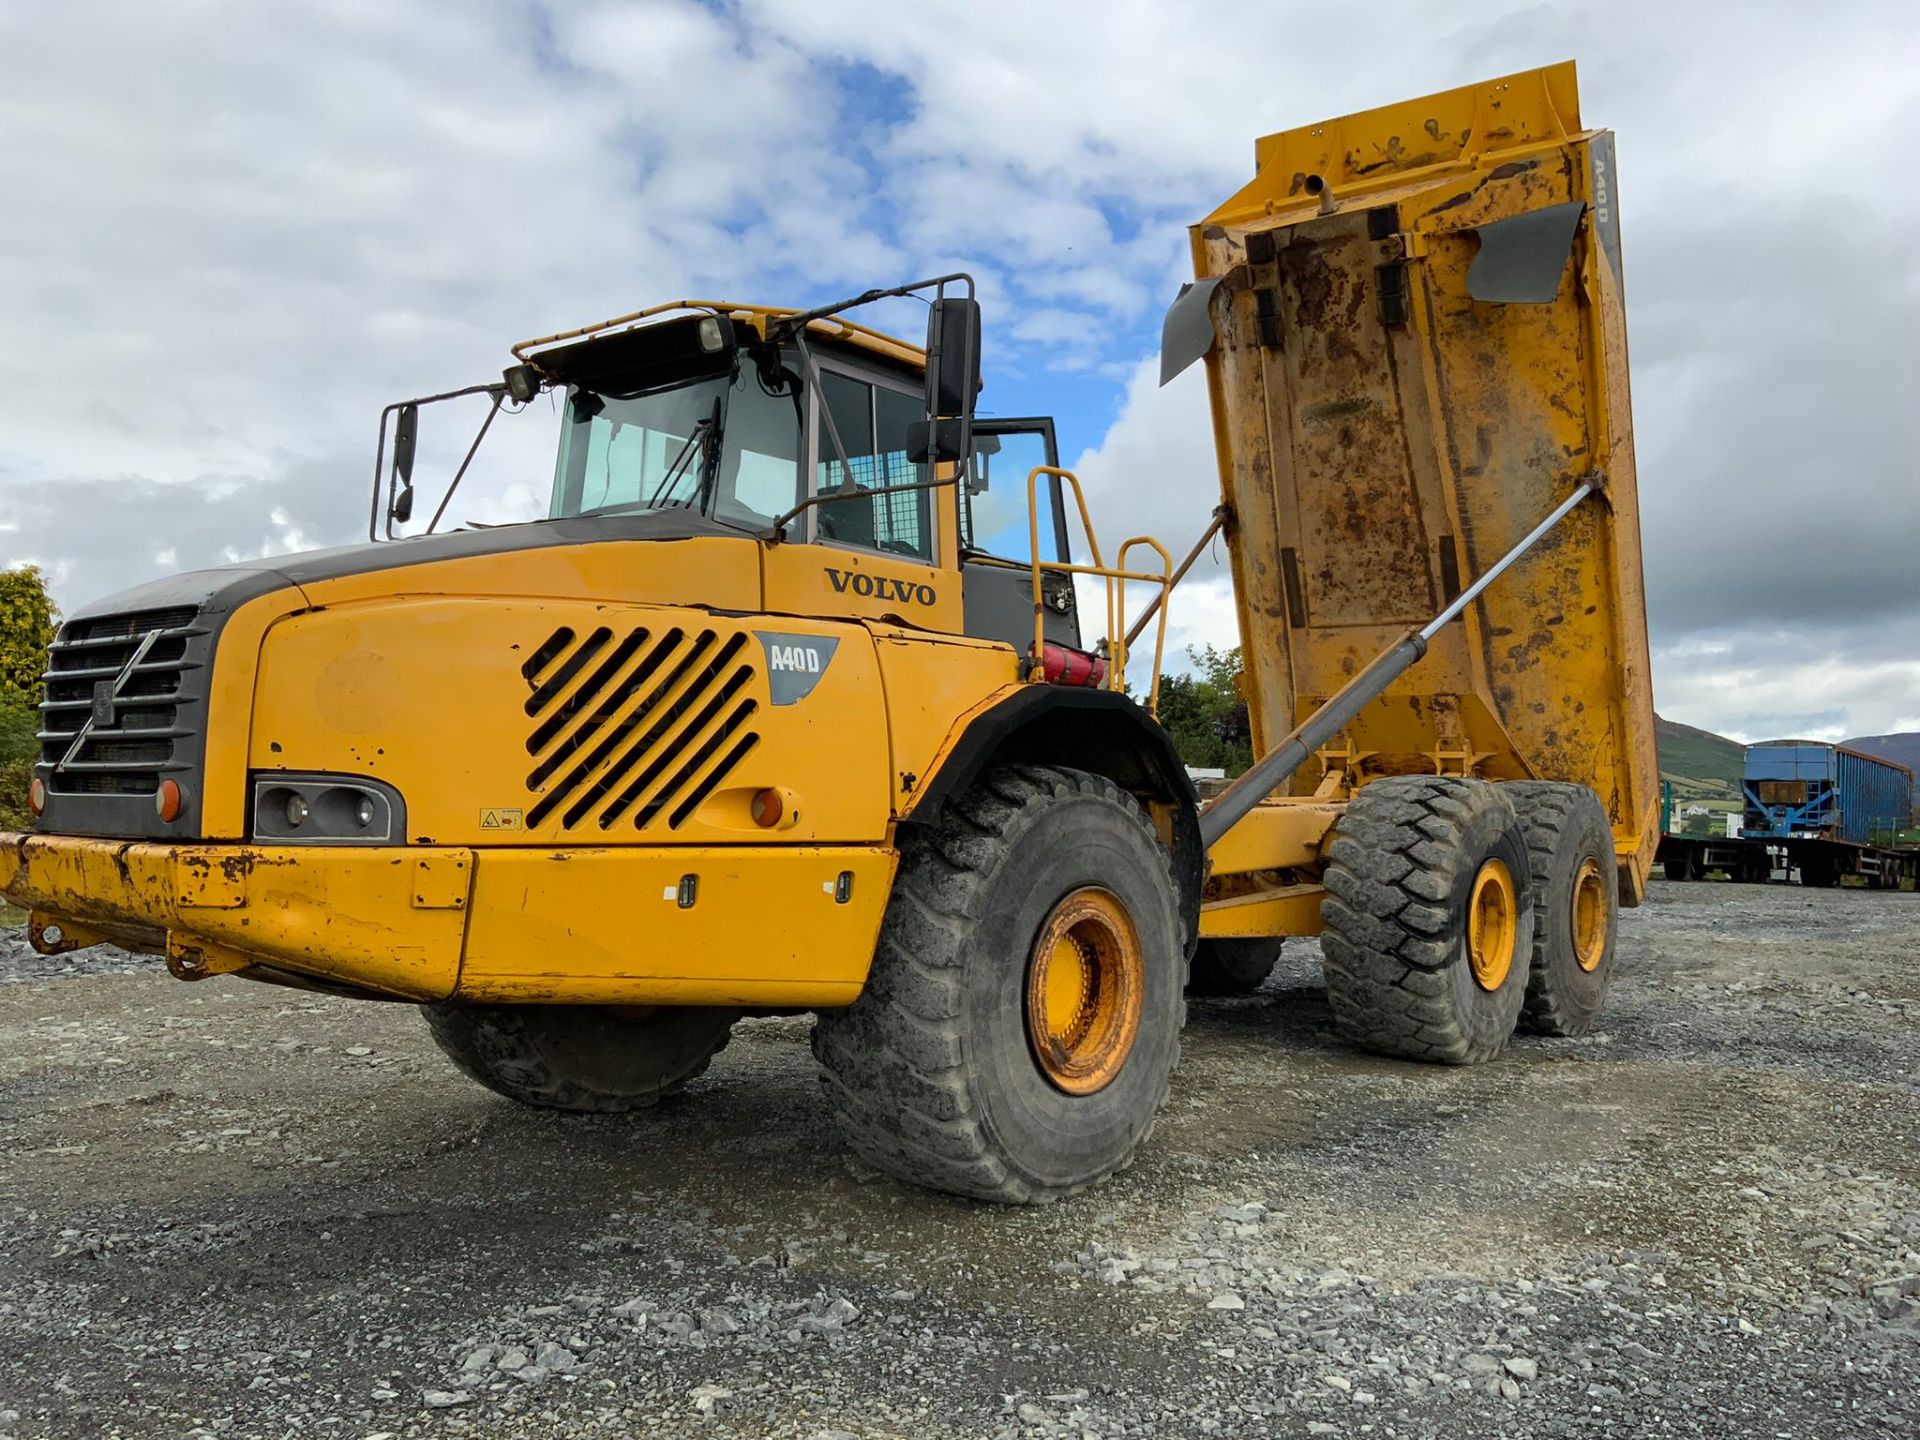 2000 VOLVO A40D ARTUCLATED DUMP TRUCK - Image 3 of 4